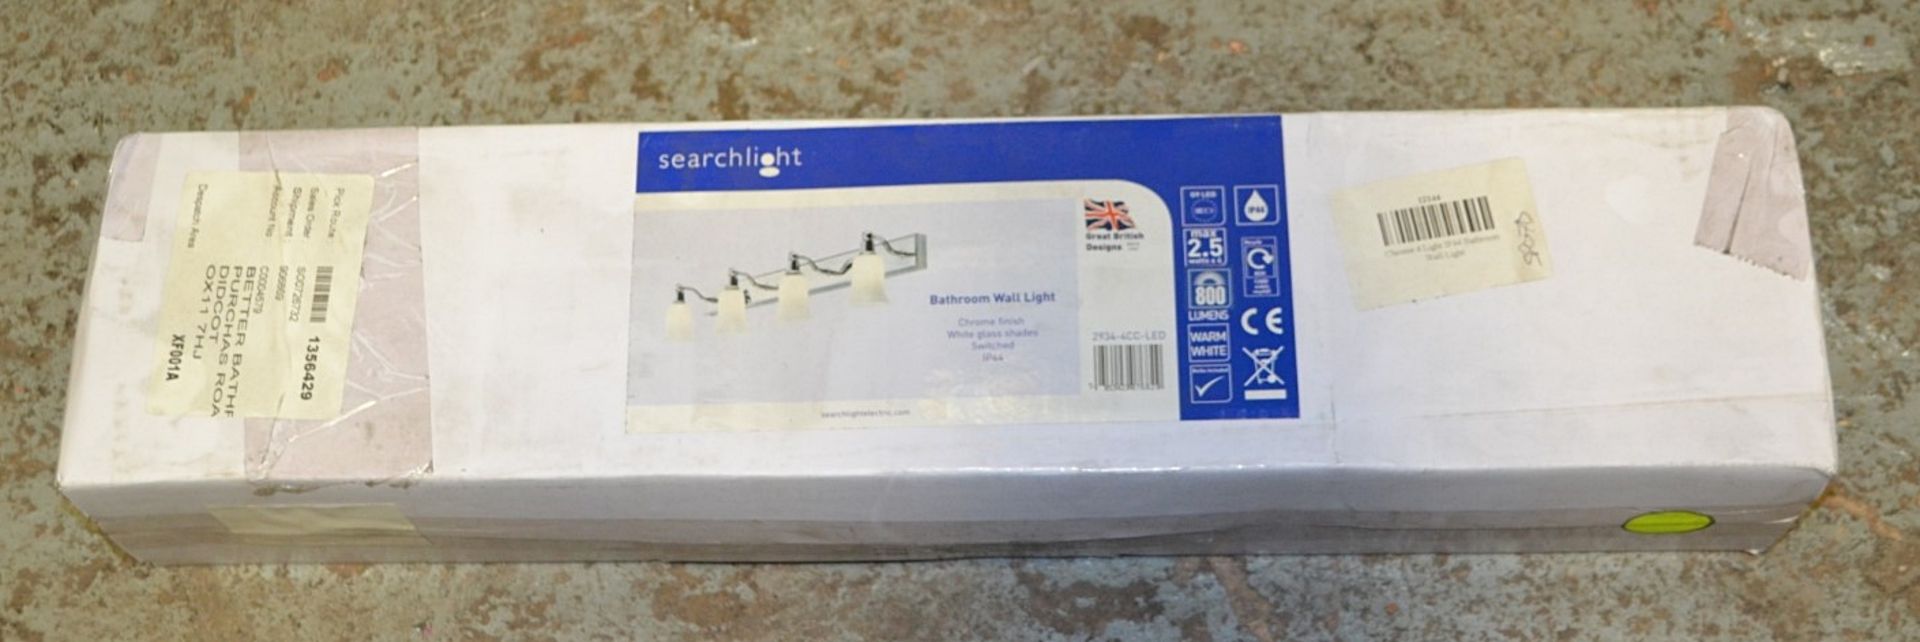 1 x Searchlight Chrome 4-Light Wall Bar With White Glass Shades - 2934-4CC-LED - New Boxed Stock - C - Image 2 of 2